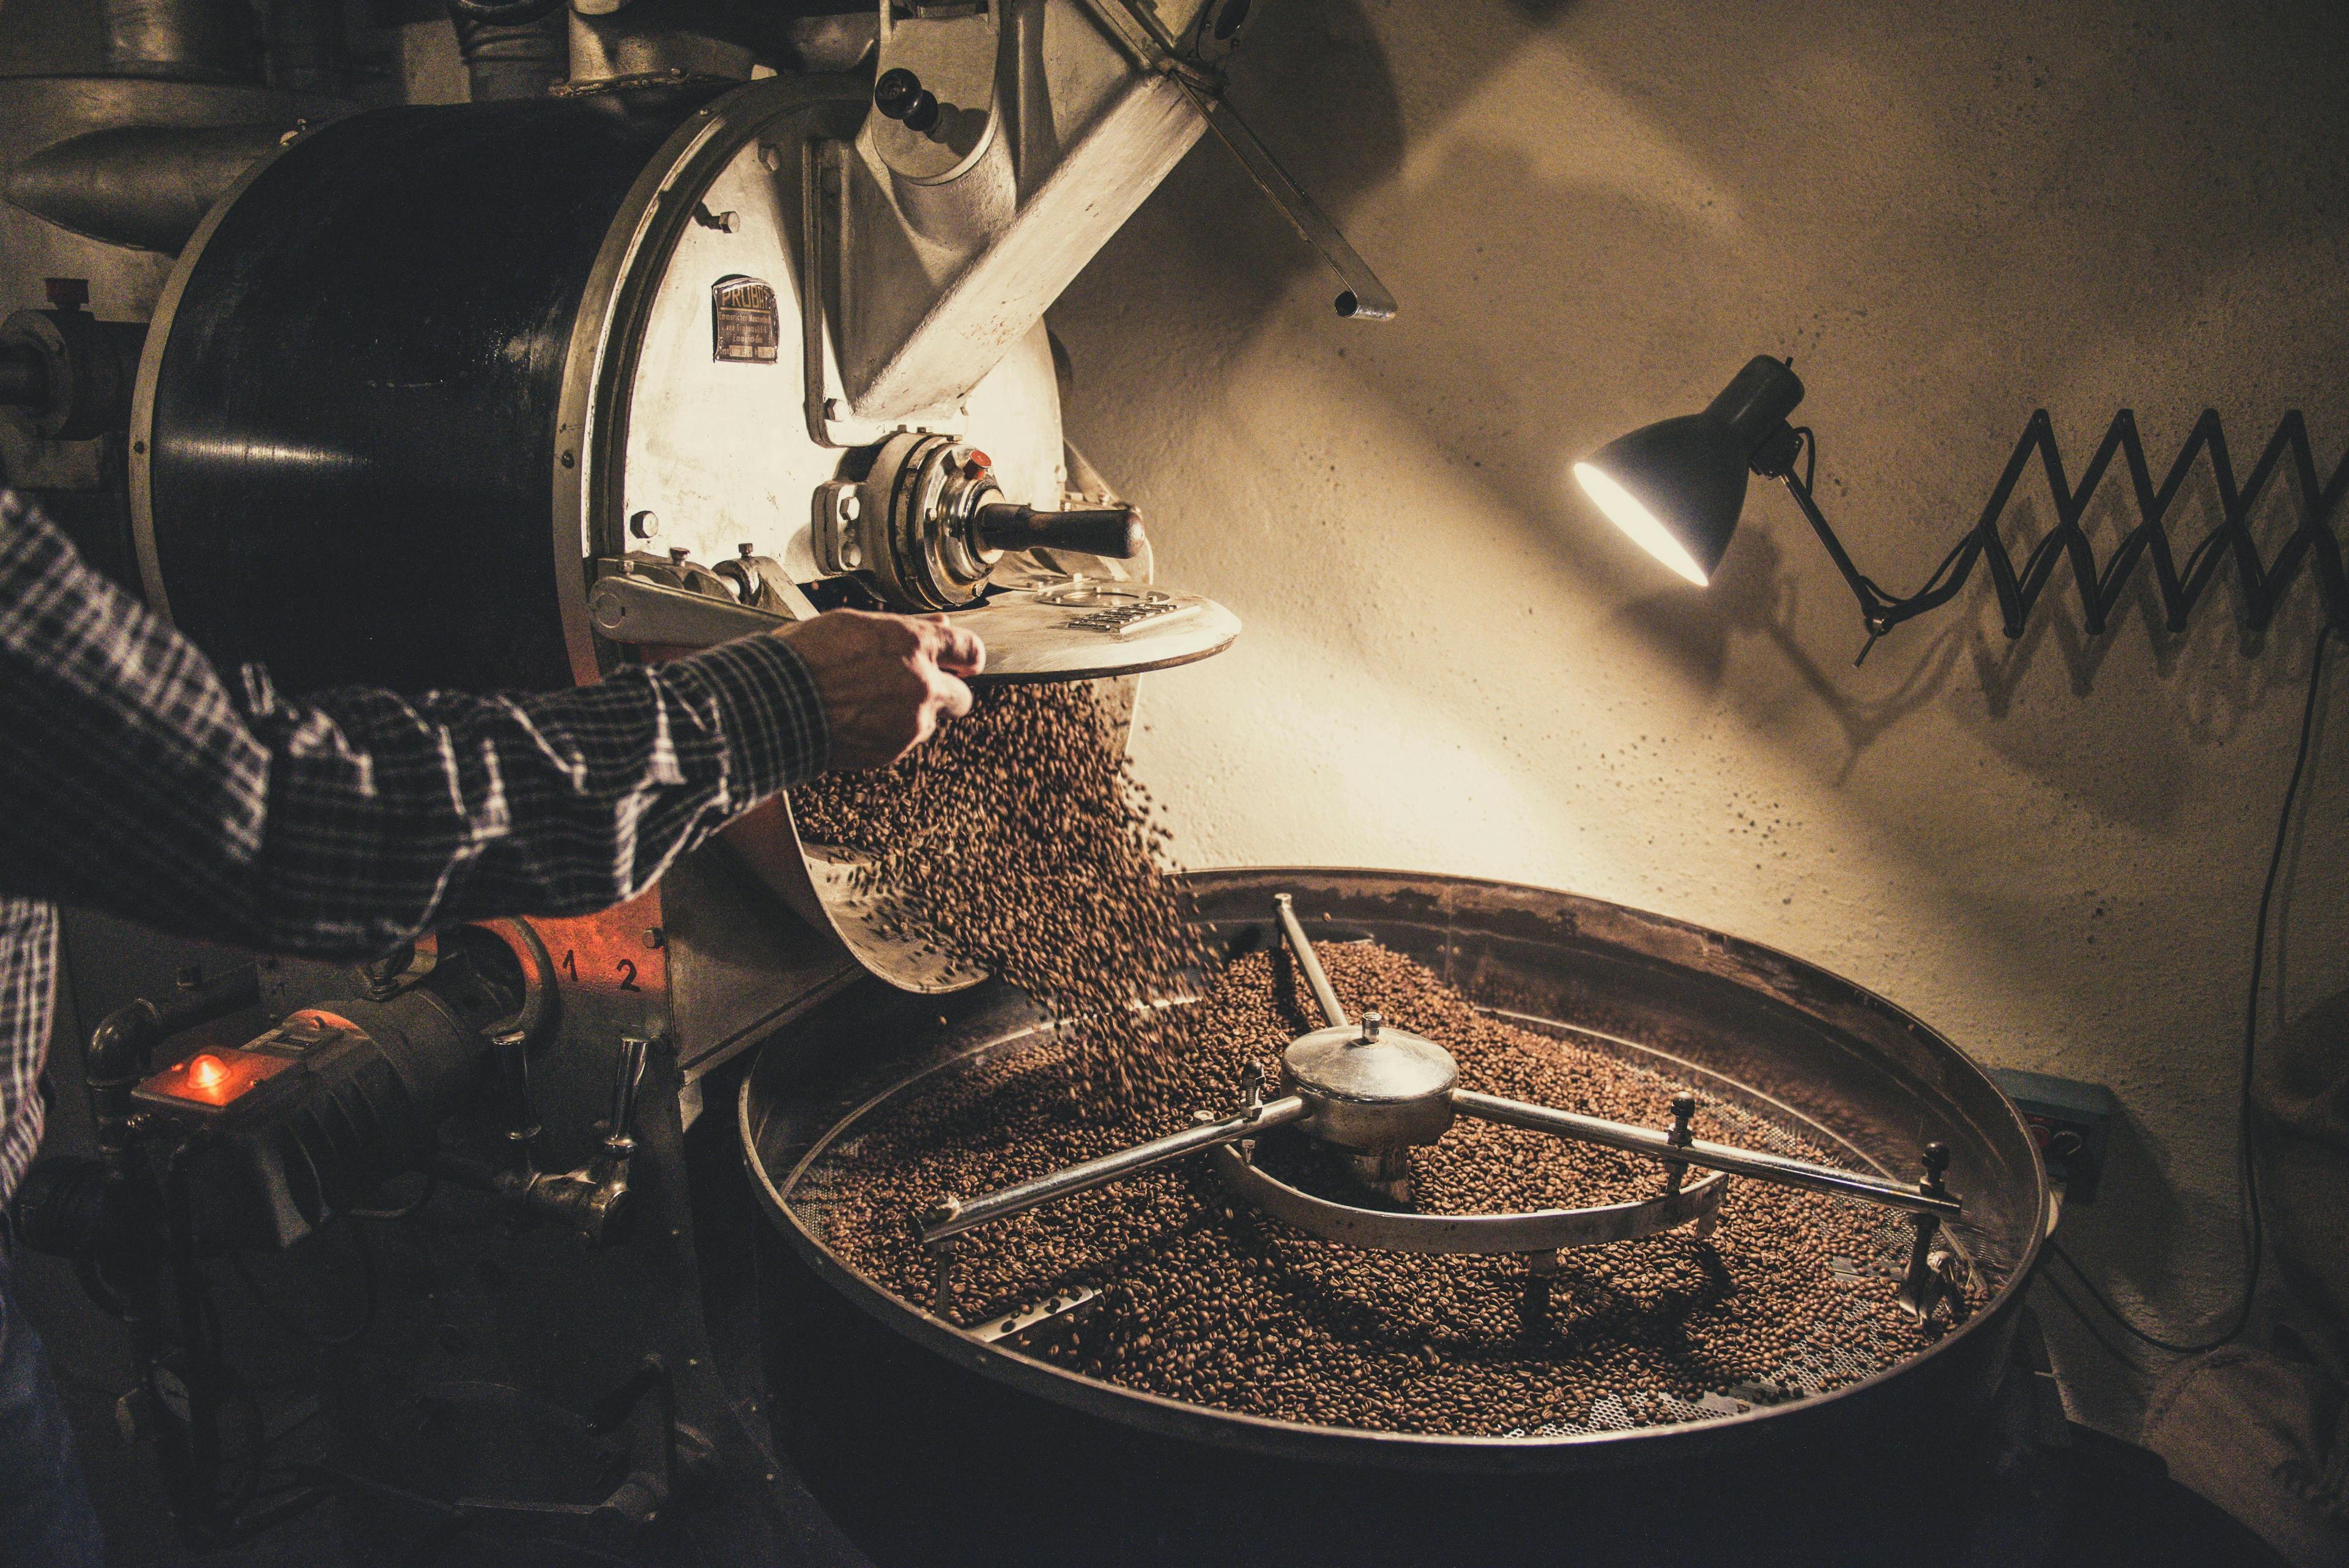  Exploring Kenya's Coffee Culture: From Farm to Cup